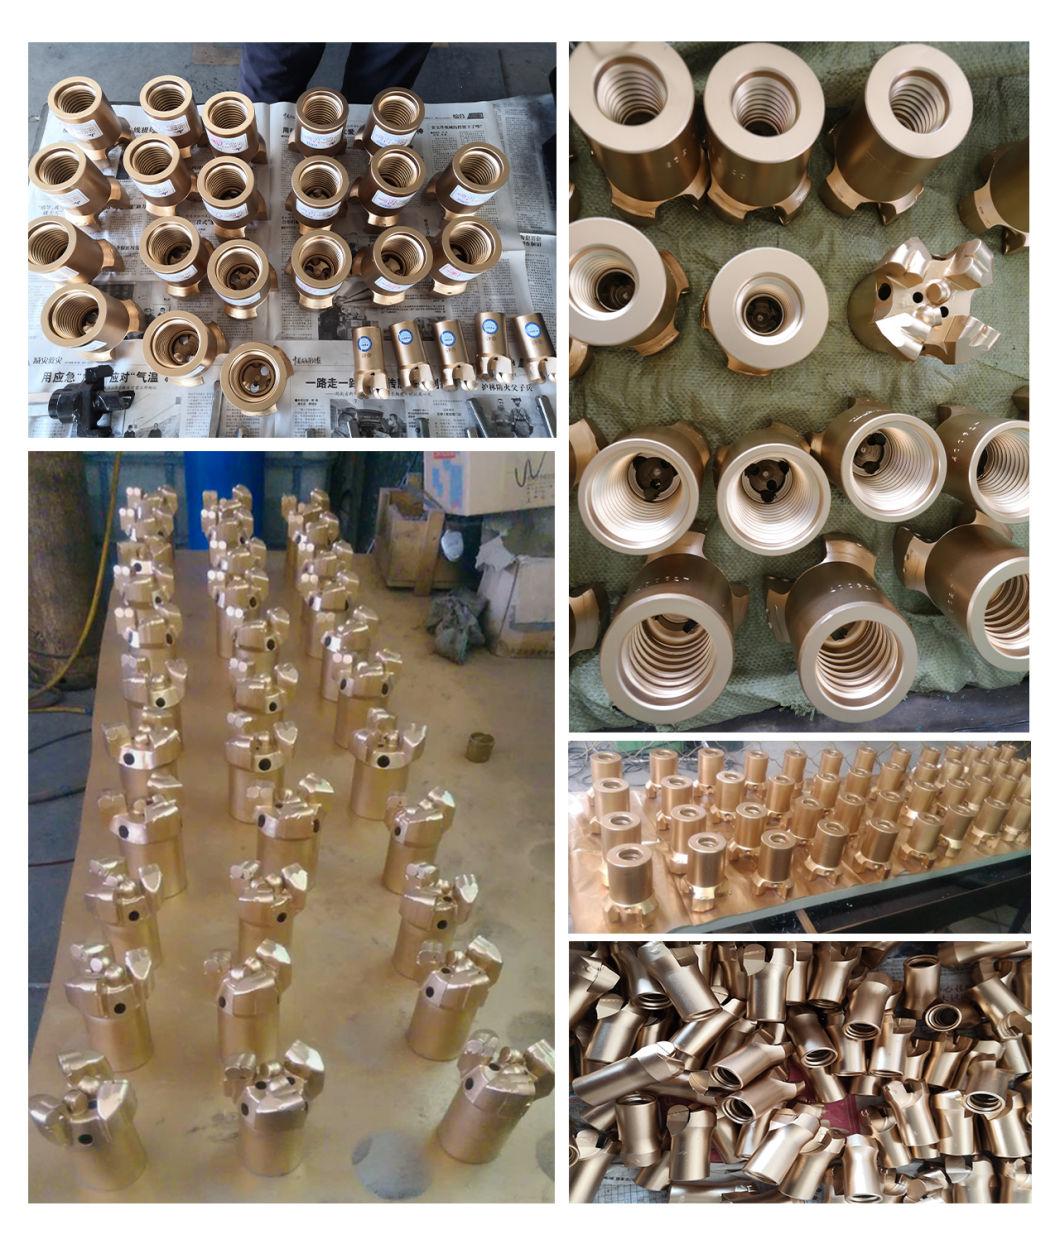 Factory Direct Supply of PDC Core Drill Bits for Water Well Drilling